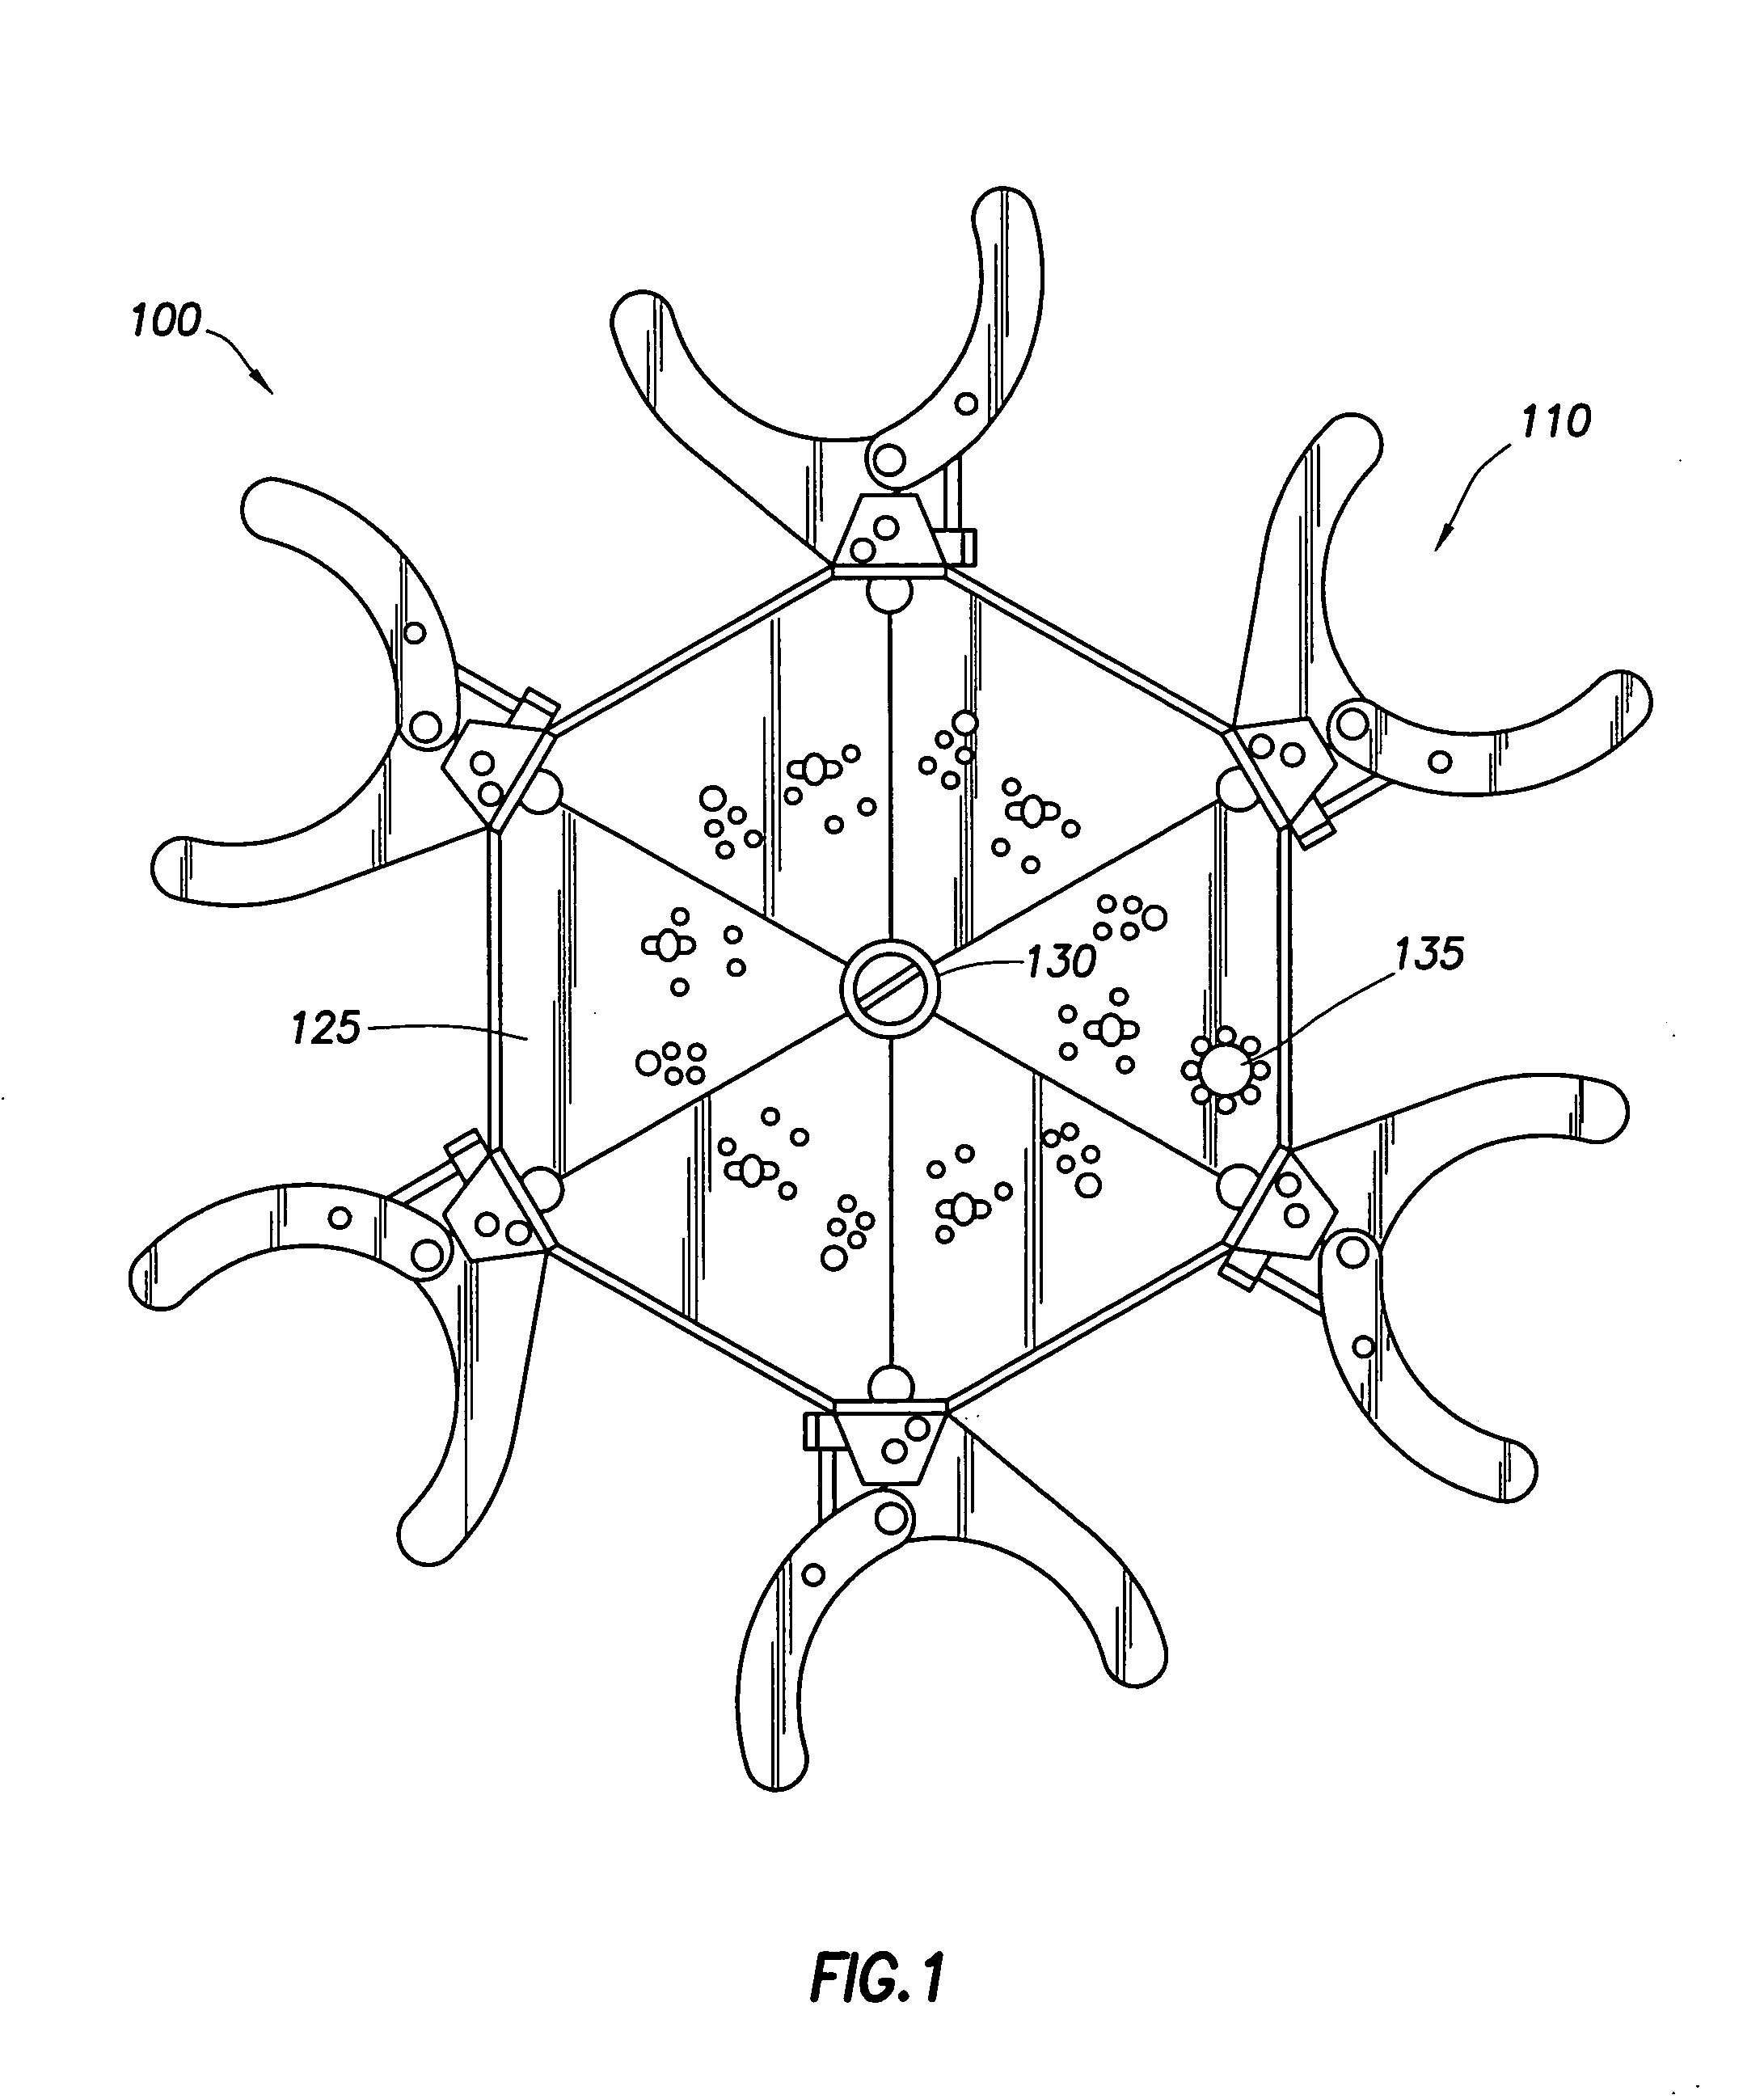 Apparatus and methods for remote installation of devices for reducing drag and vortex induced vibration